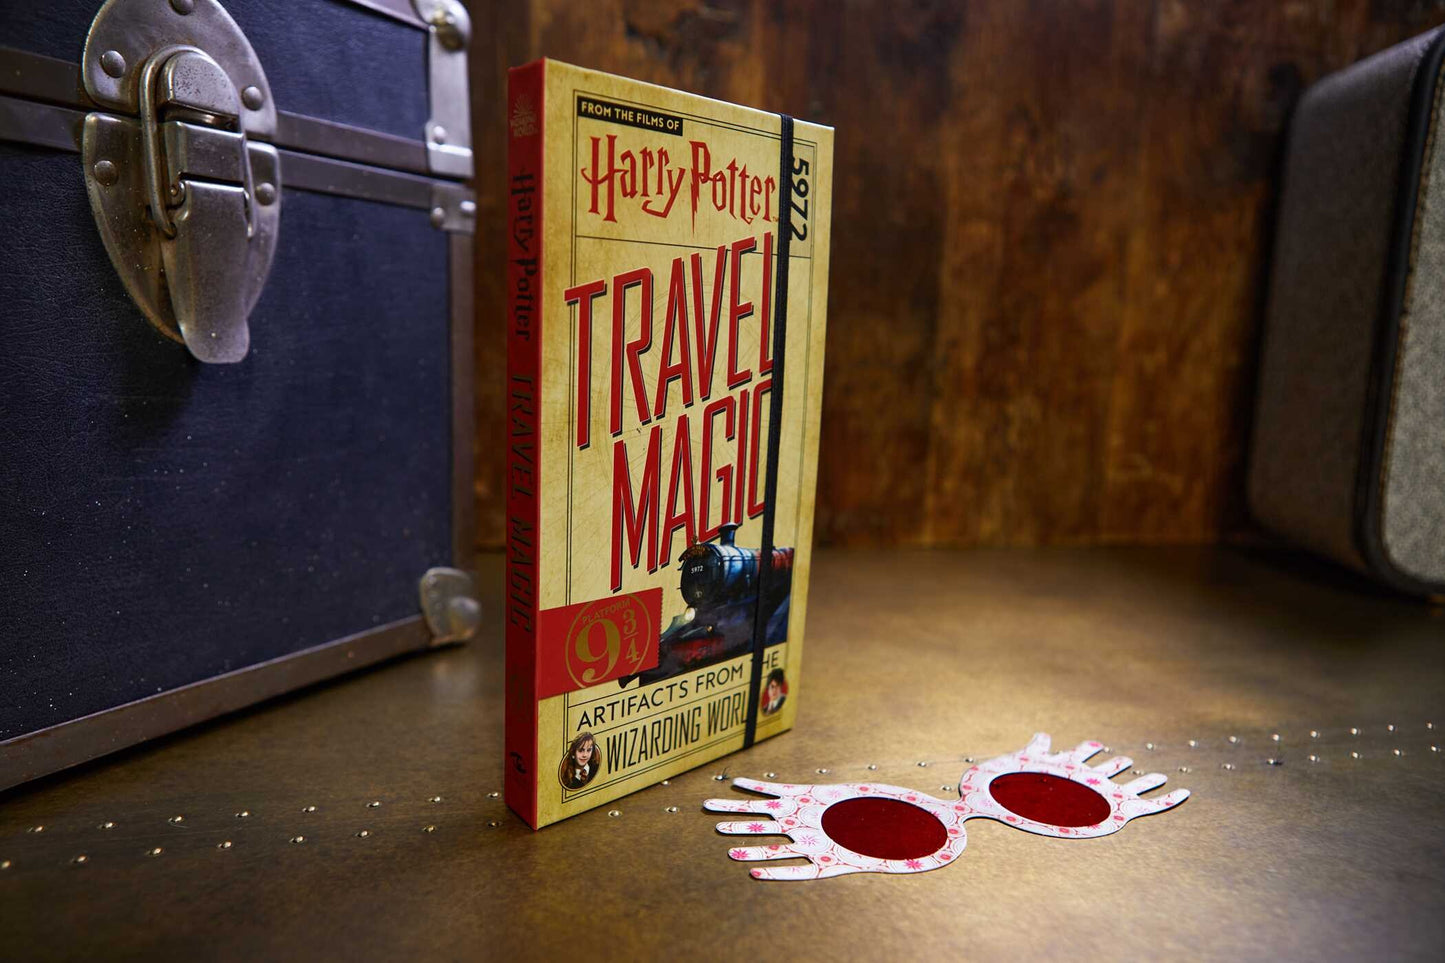 Book (Hardcover) - Harry Potter Travel Magic: Artifacts From the Wizarding World